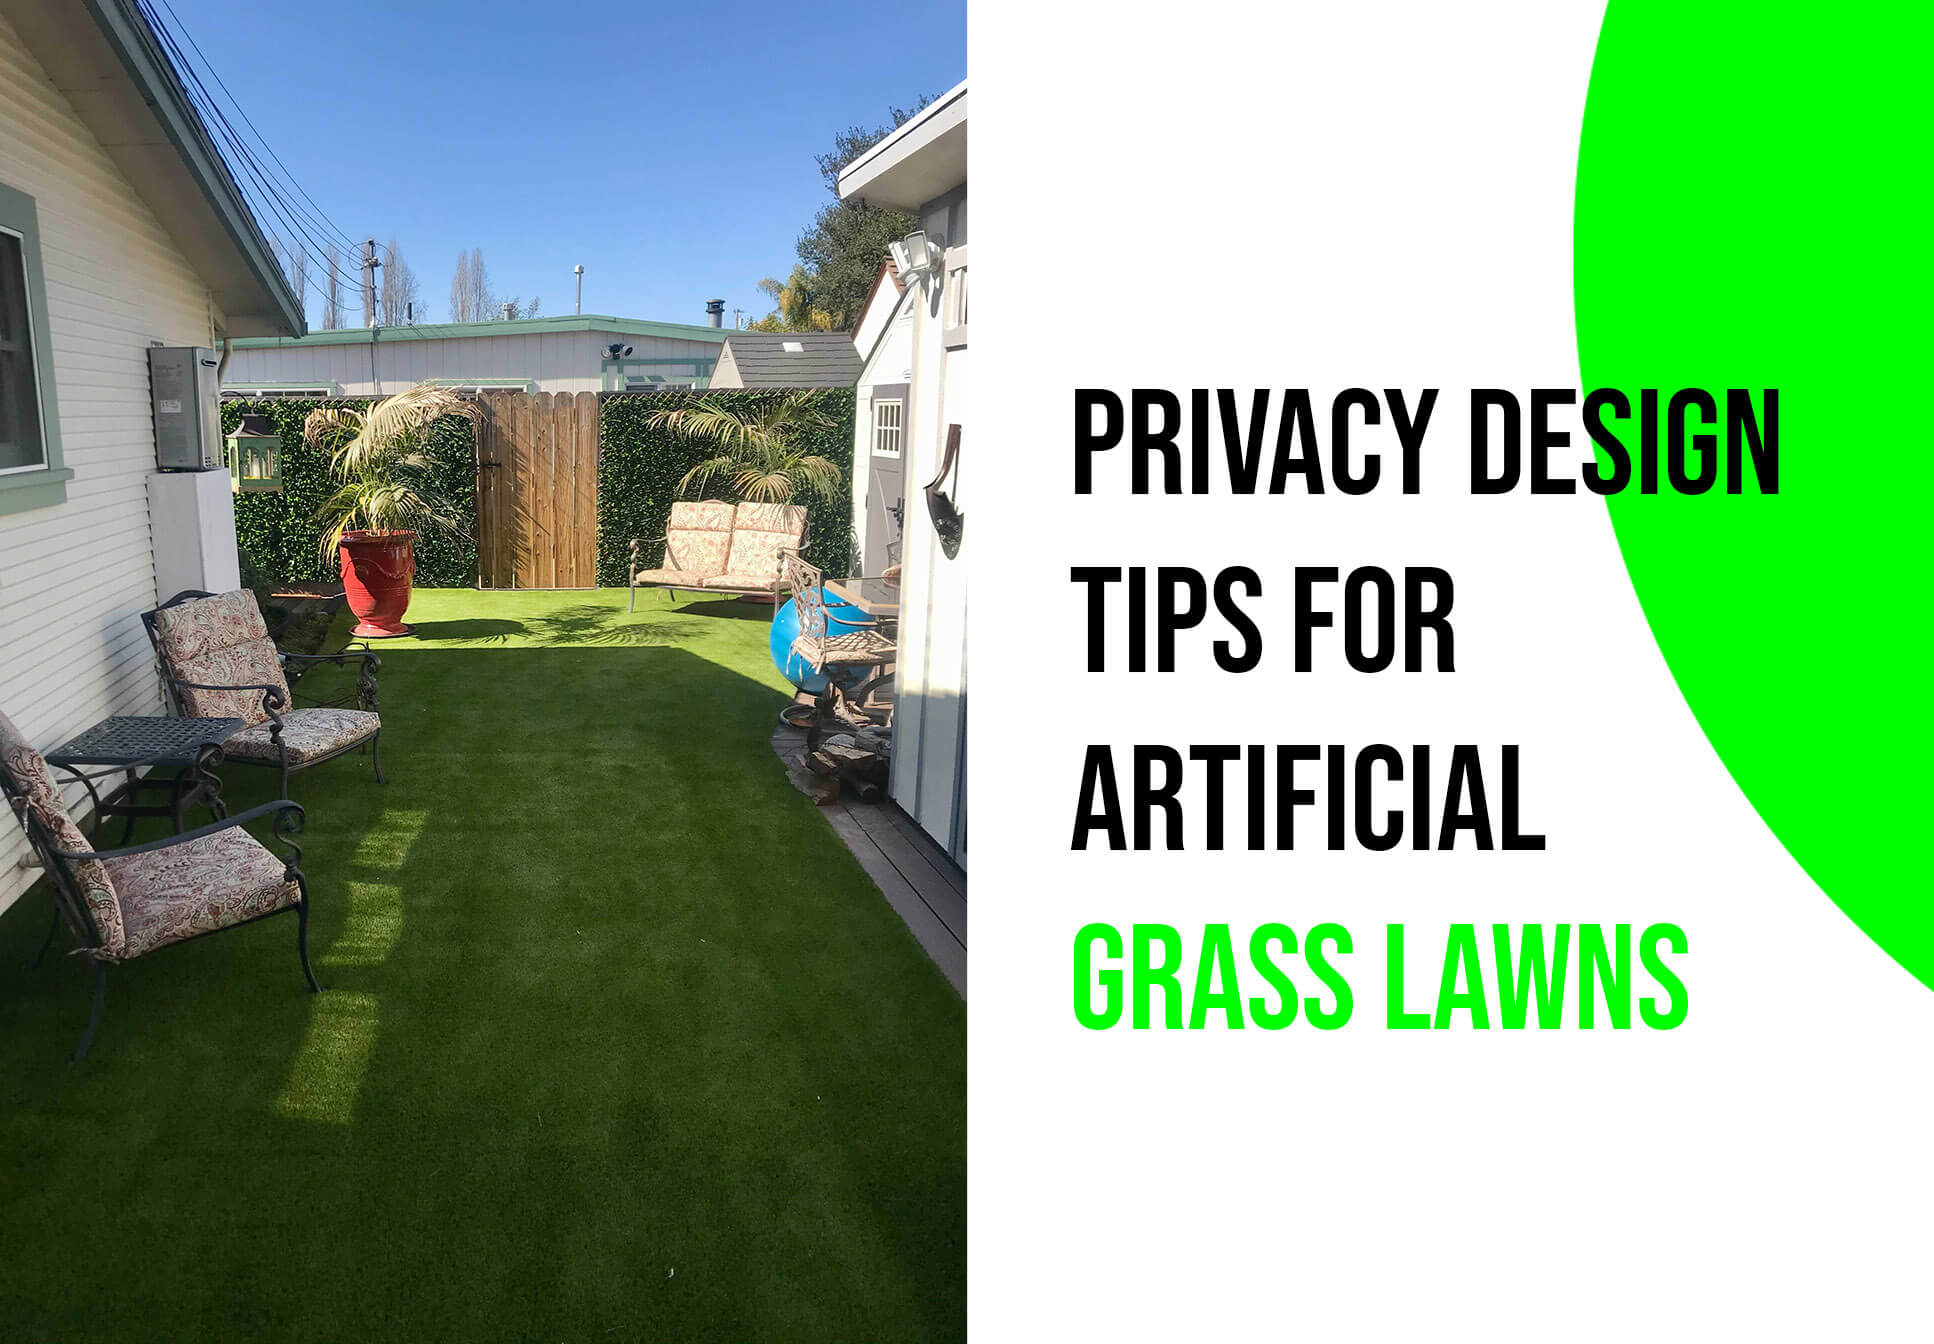 Privacy Design Tips for Artificial Grass Lawns